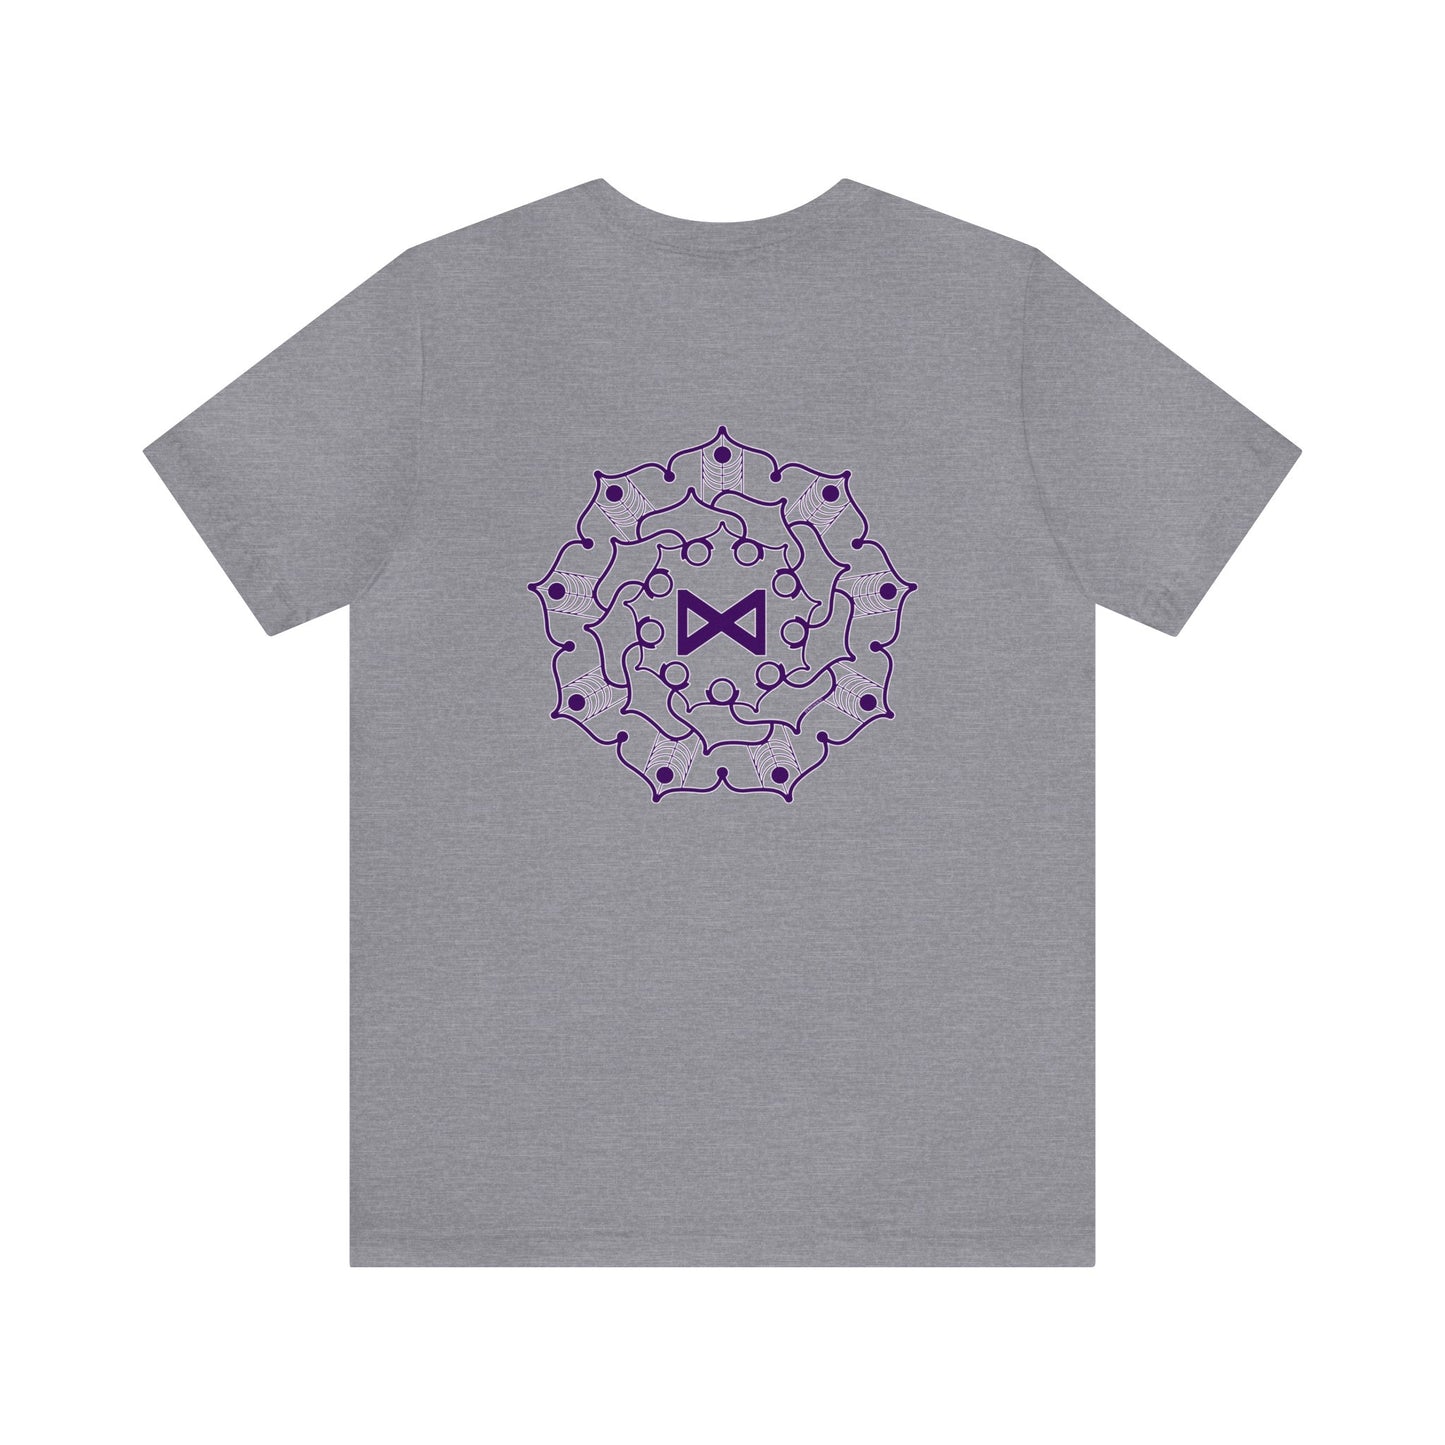 Spellcaster by Patti Negri "Intuition" Unisex Logo Tee